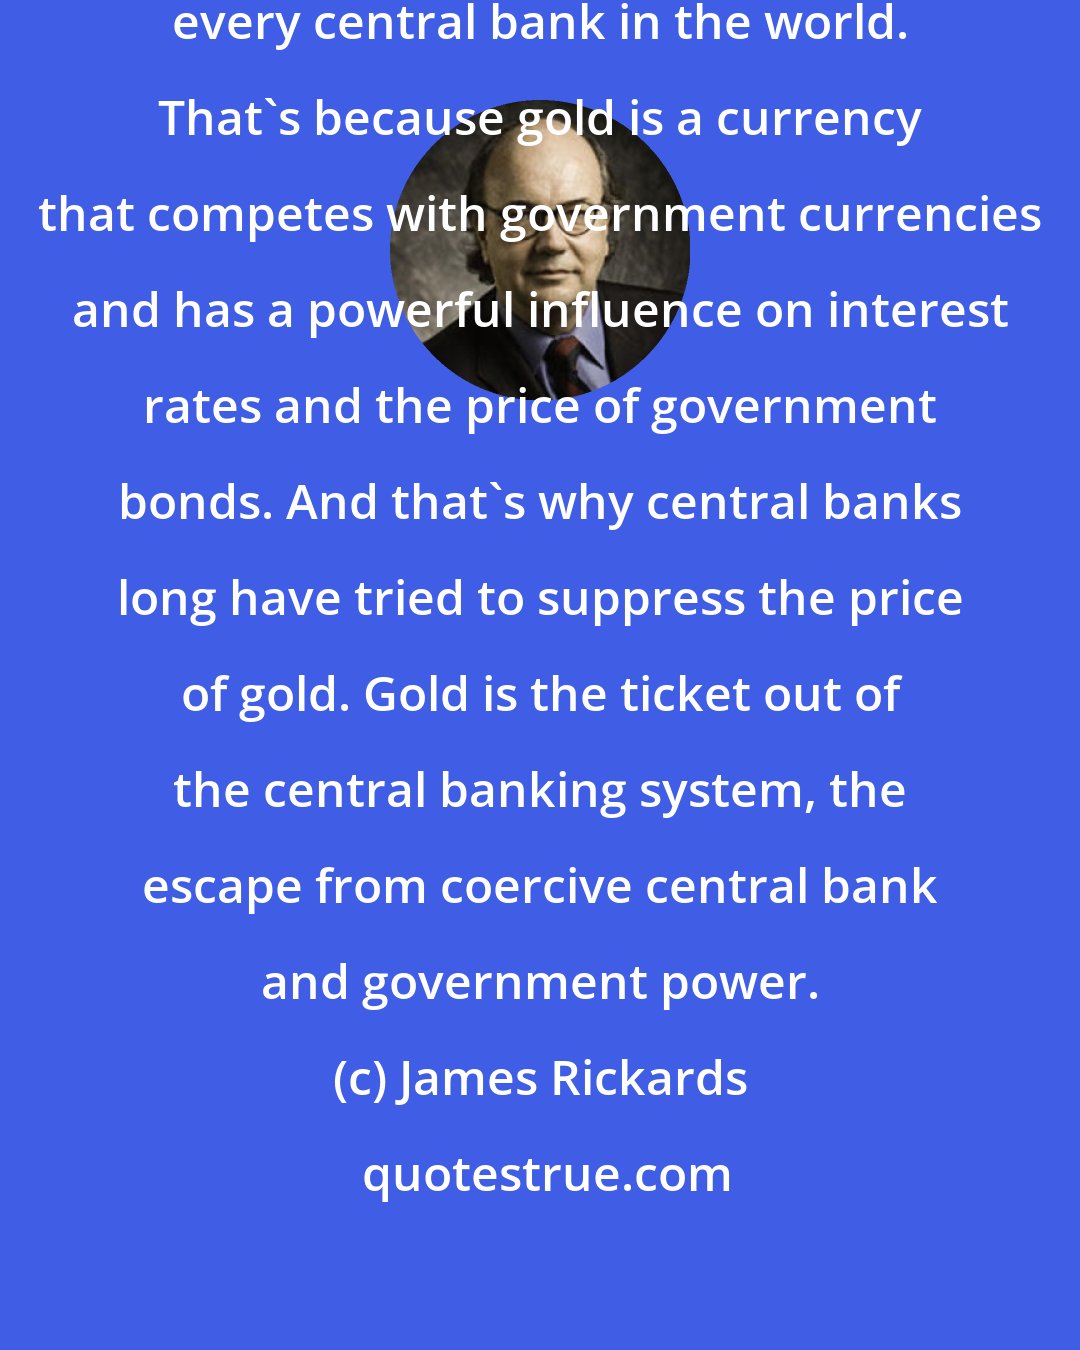 James Rickards: When you own gold you're fighting every central bank in the world. That's because gold is a currency that competes with government currencies and has a powerful influence on interest rates and the price of government bonds. And that's why central banks long have tried to suppress the price of gold. Gold is the ticket out of the central banking system, the escape from coercive central bank and government power.